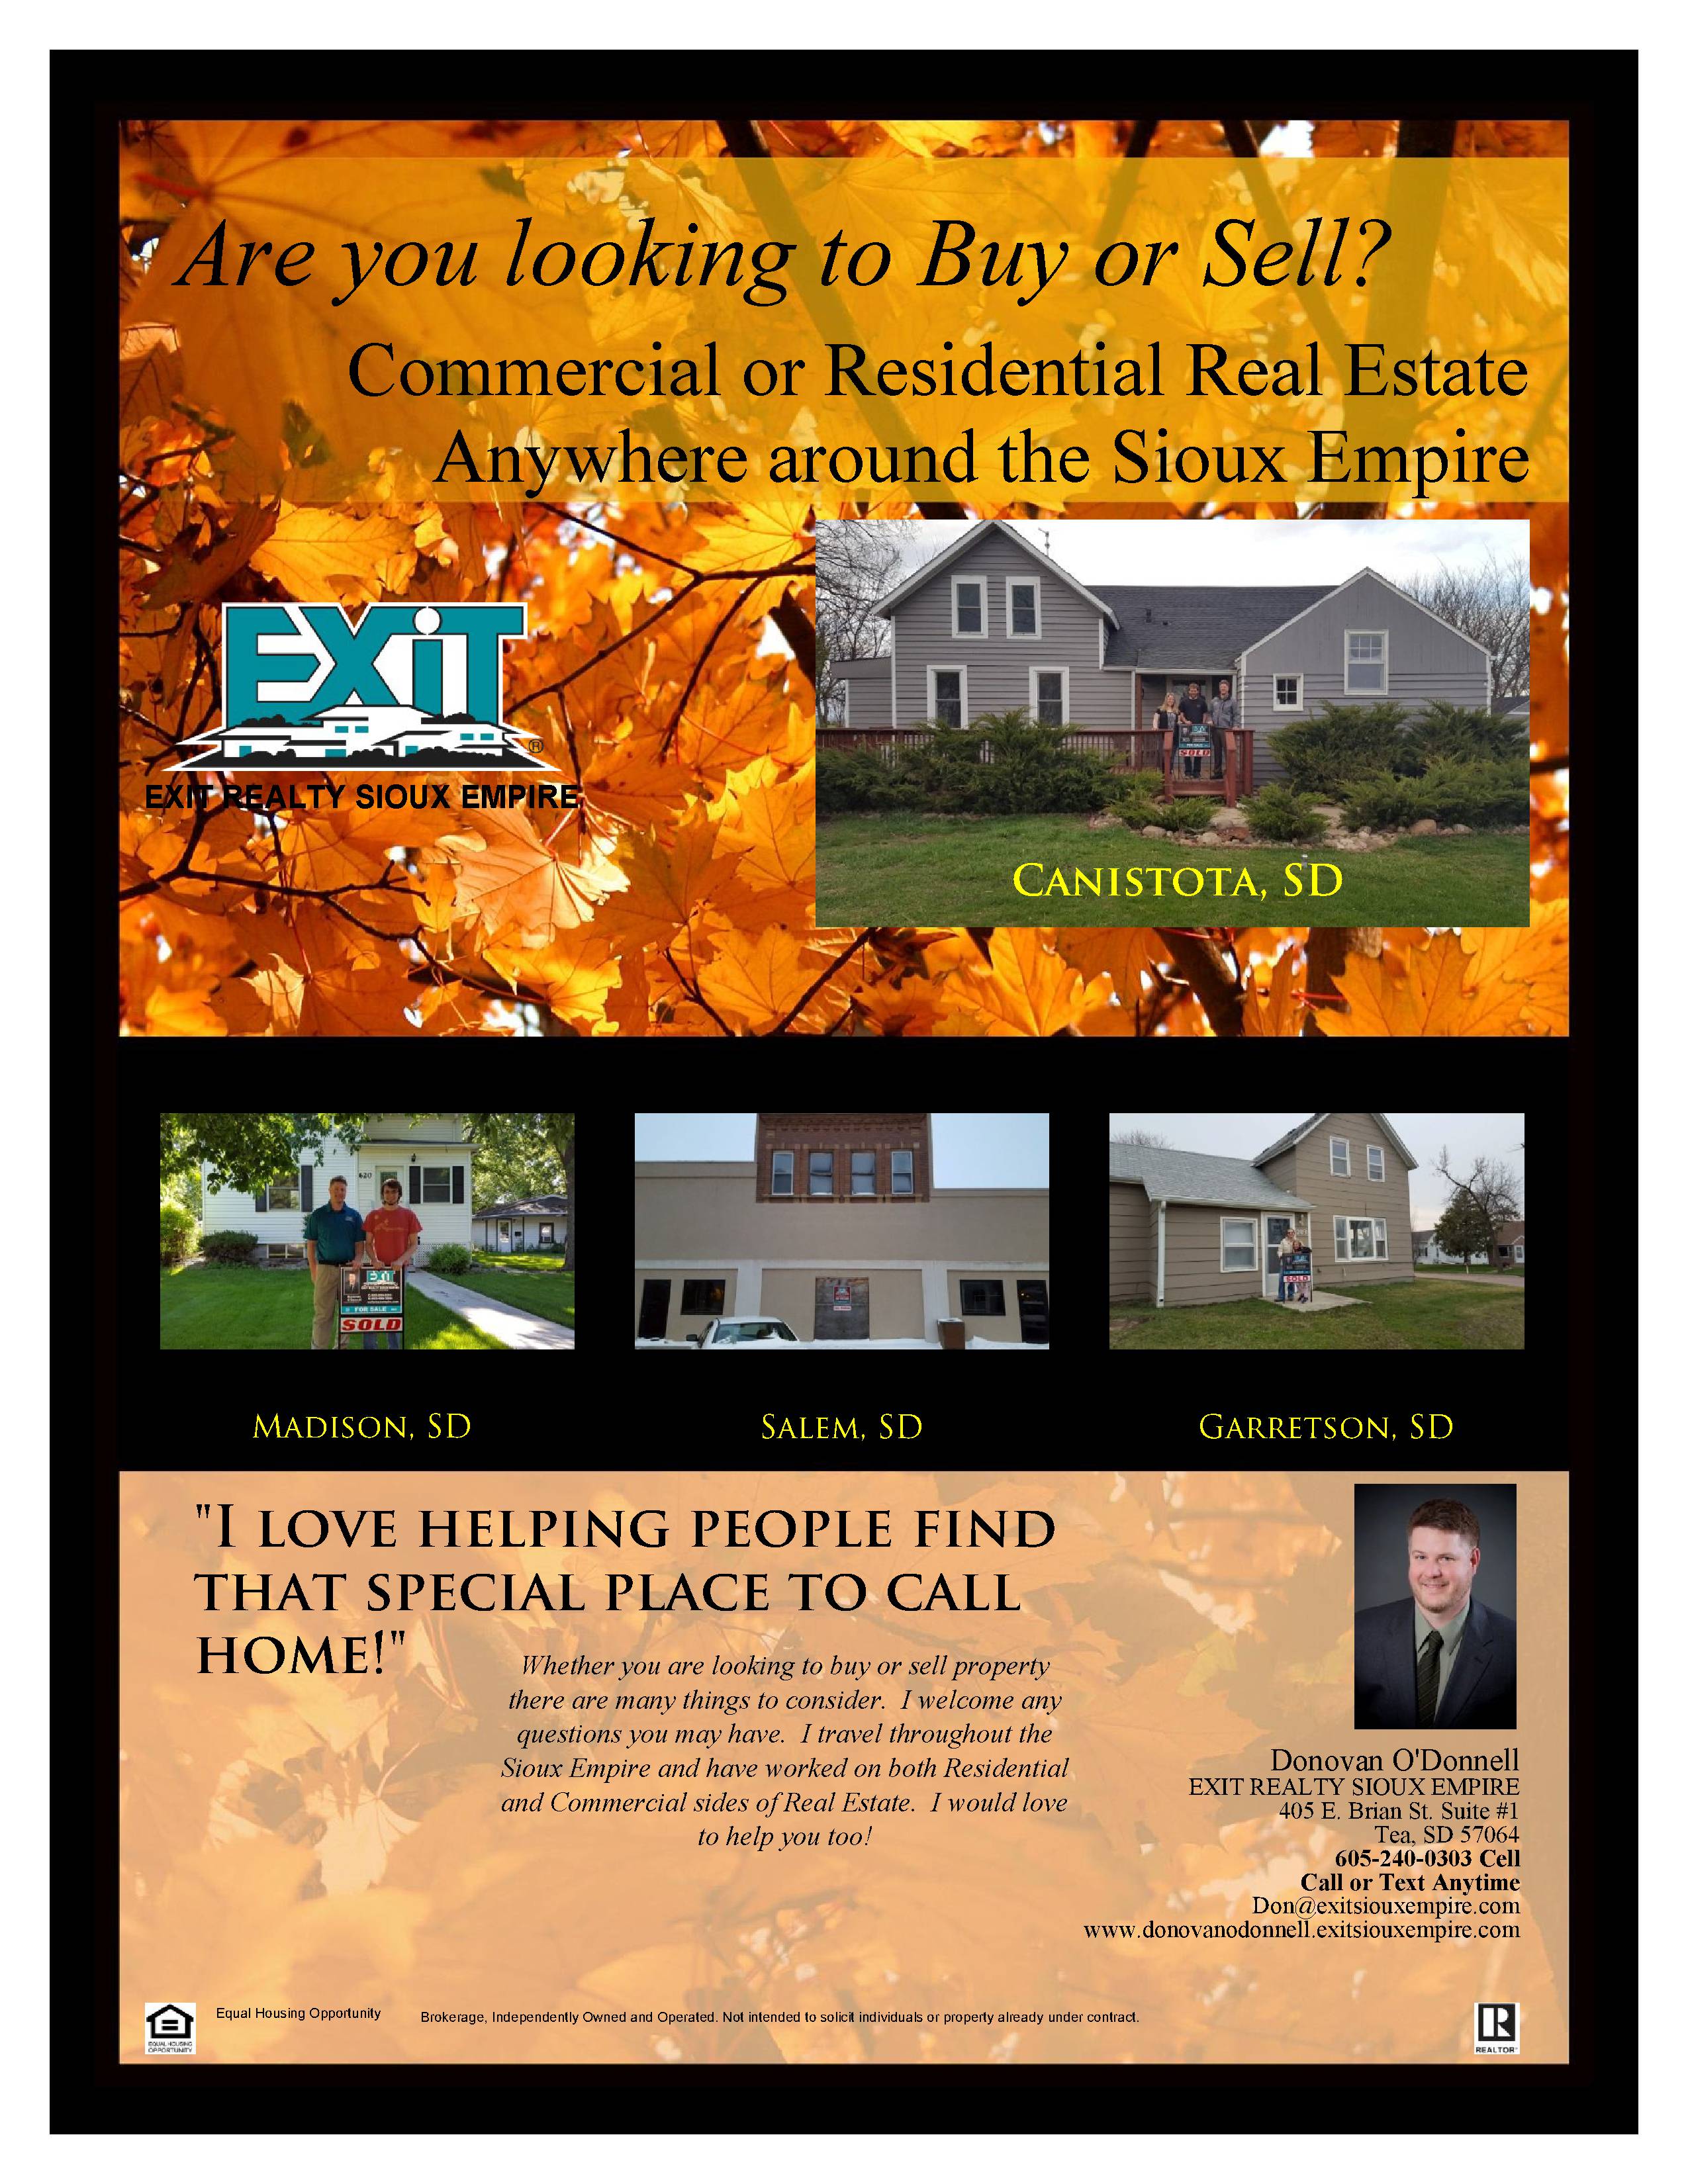 Check out my new flyer! Donovan O'Donnell EXIT Realty Sioux Empire